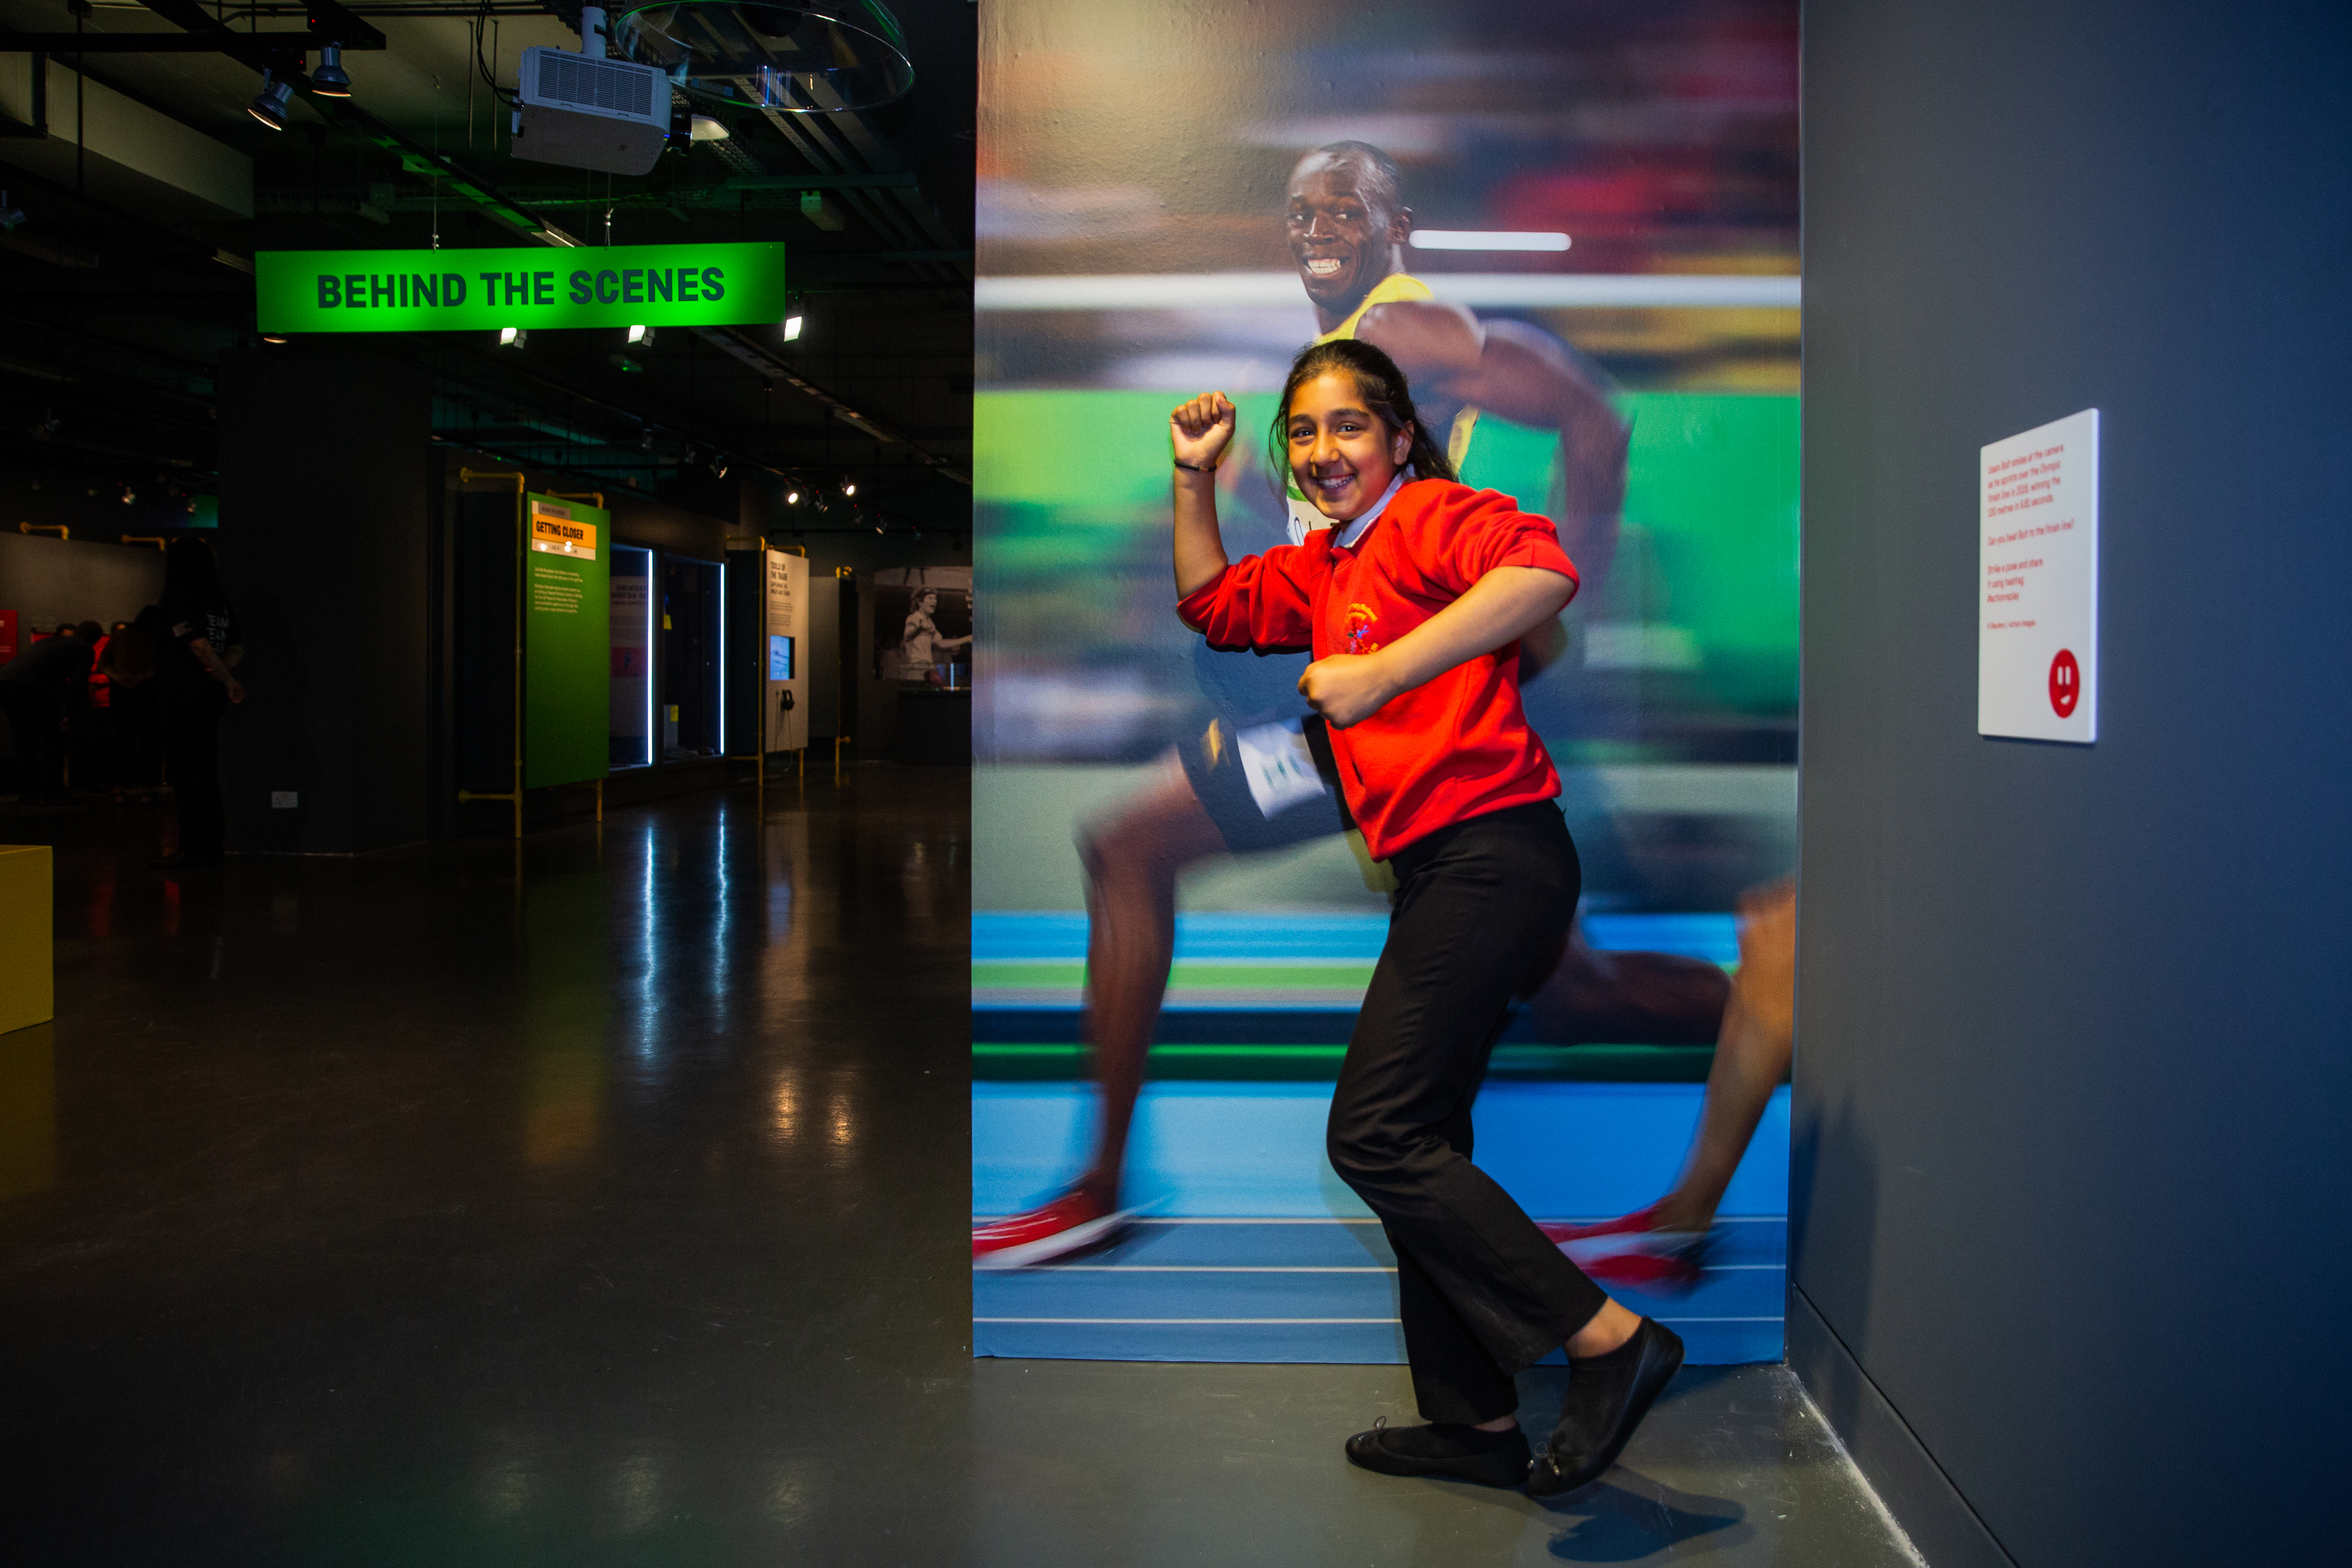 A student poses in front of a life-size image of sprinter Usain Bolt at the Action Replay exhibition